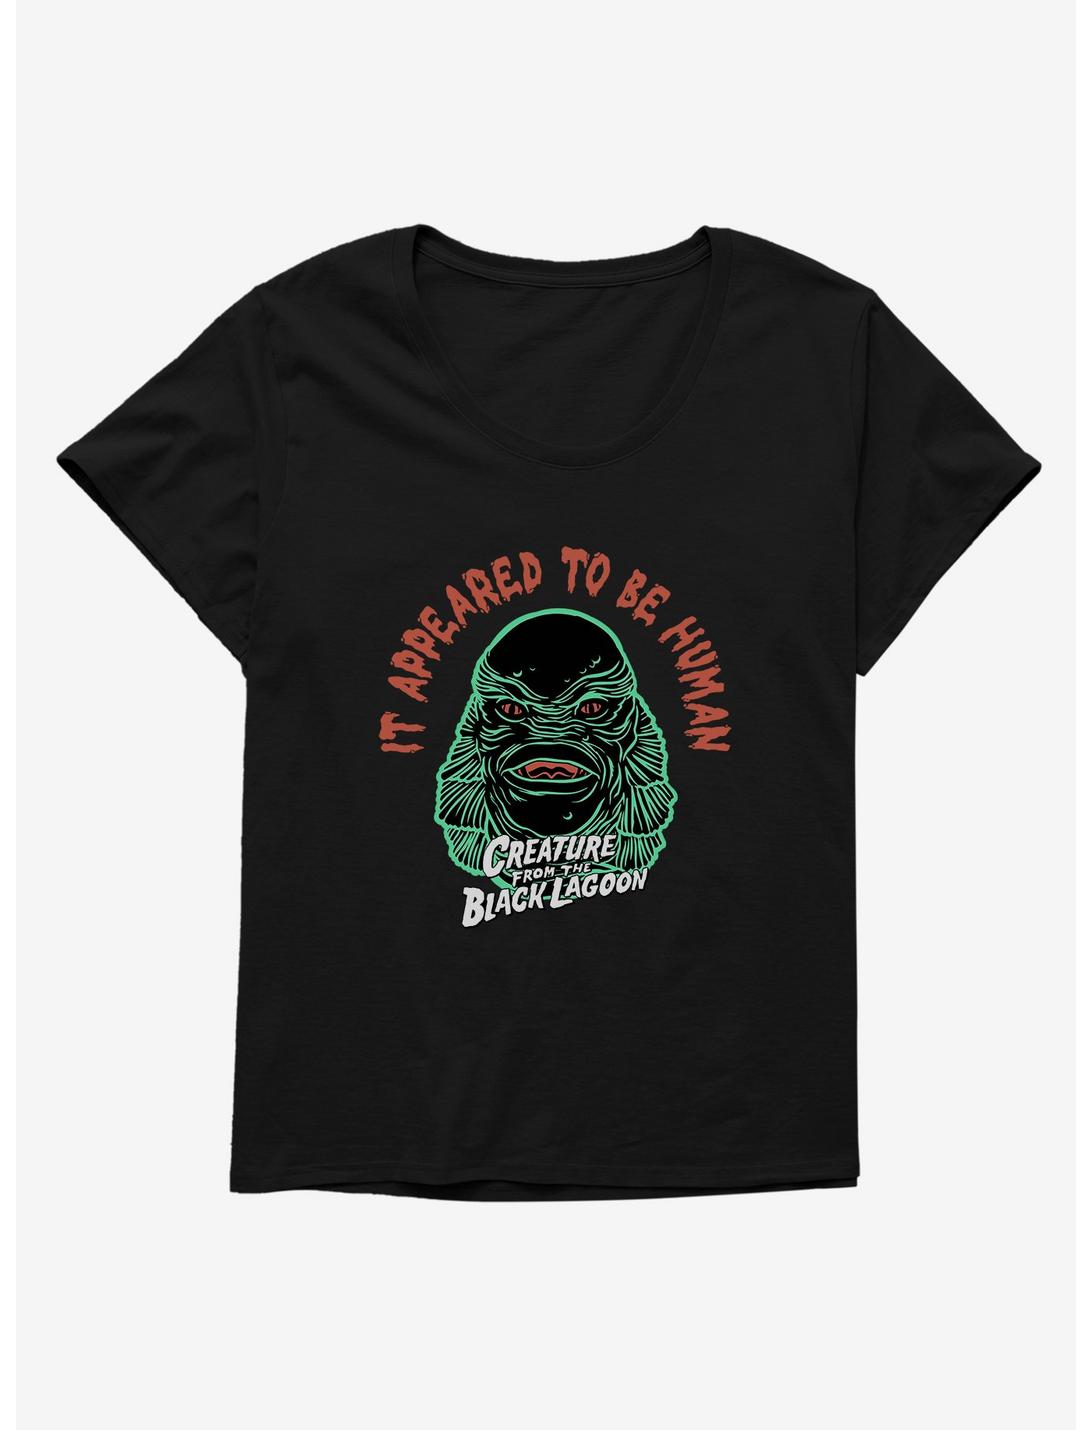 Creature From The Black Lagoon It Appeared To Be Human Girls T-Shirt Plus Size, BLACK, hi-res